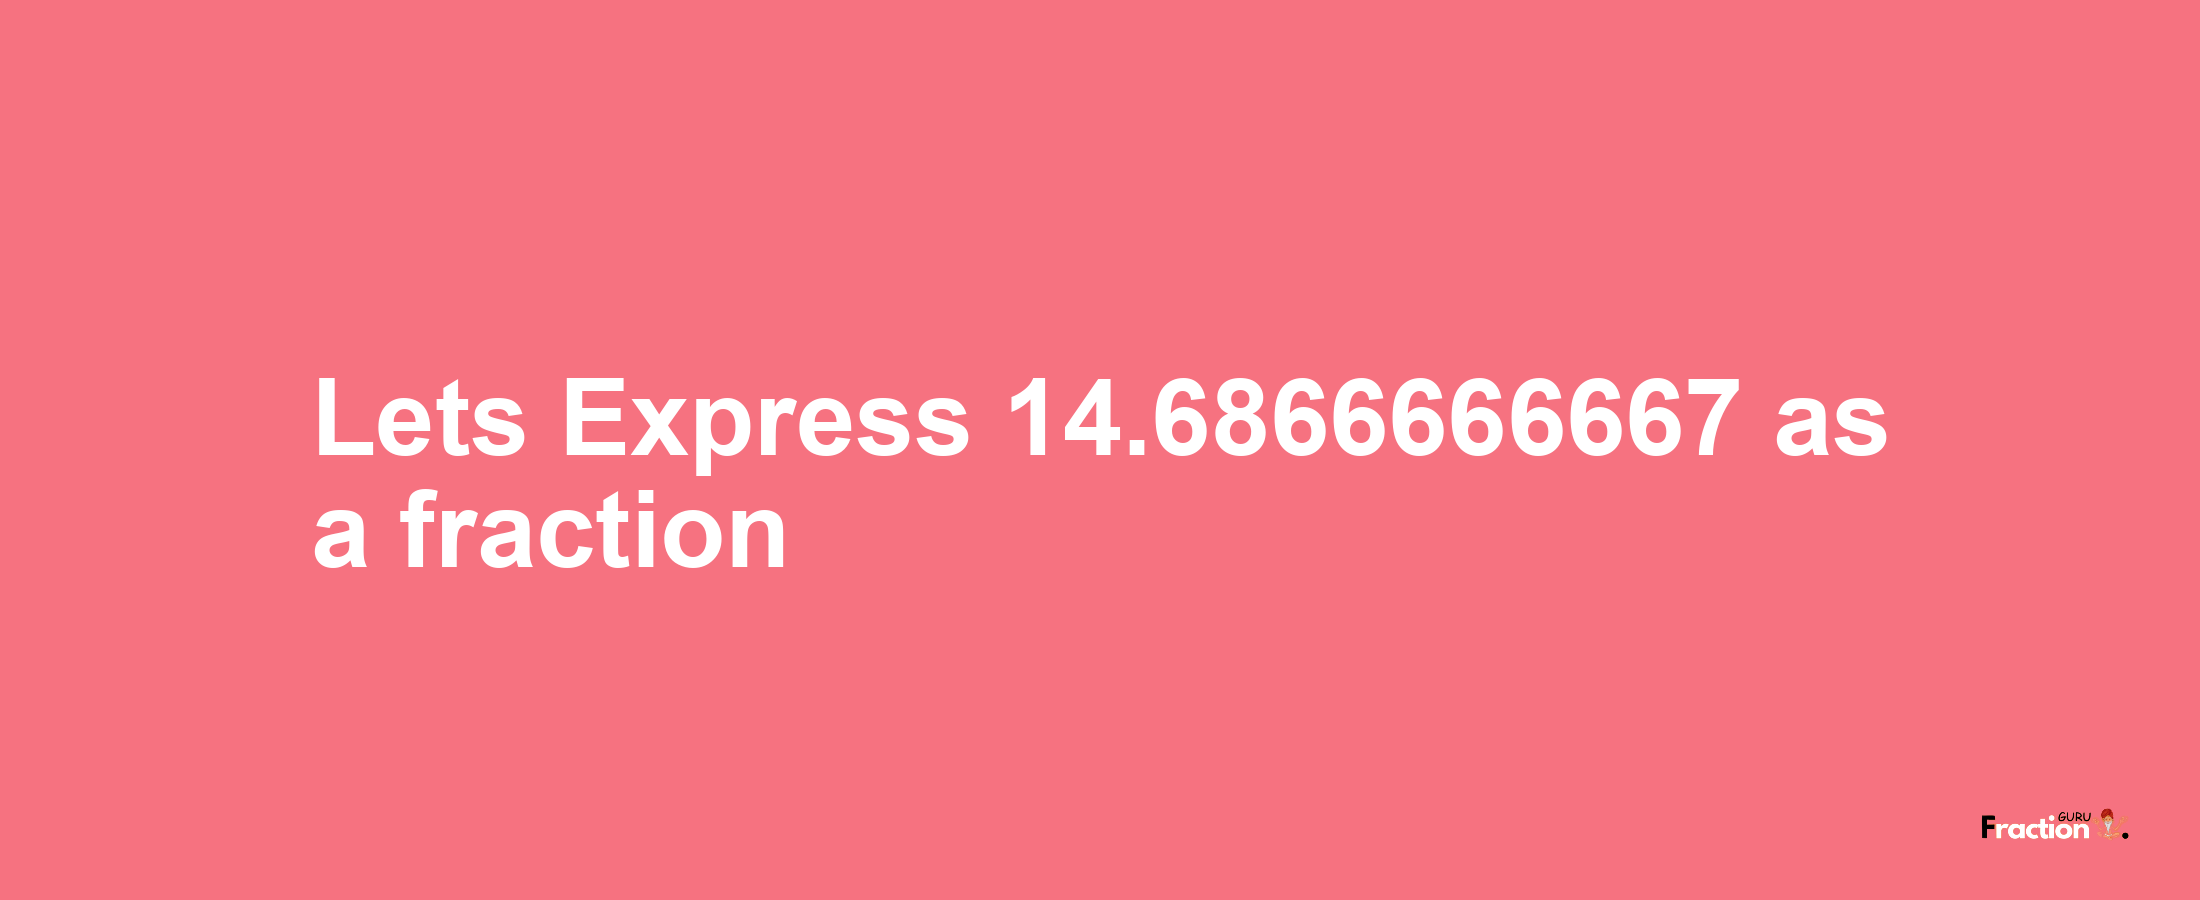 Lets Express 14.6866666667 as afraction